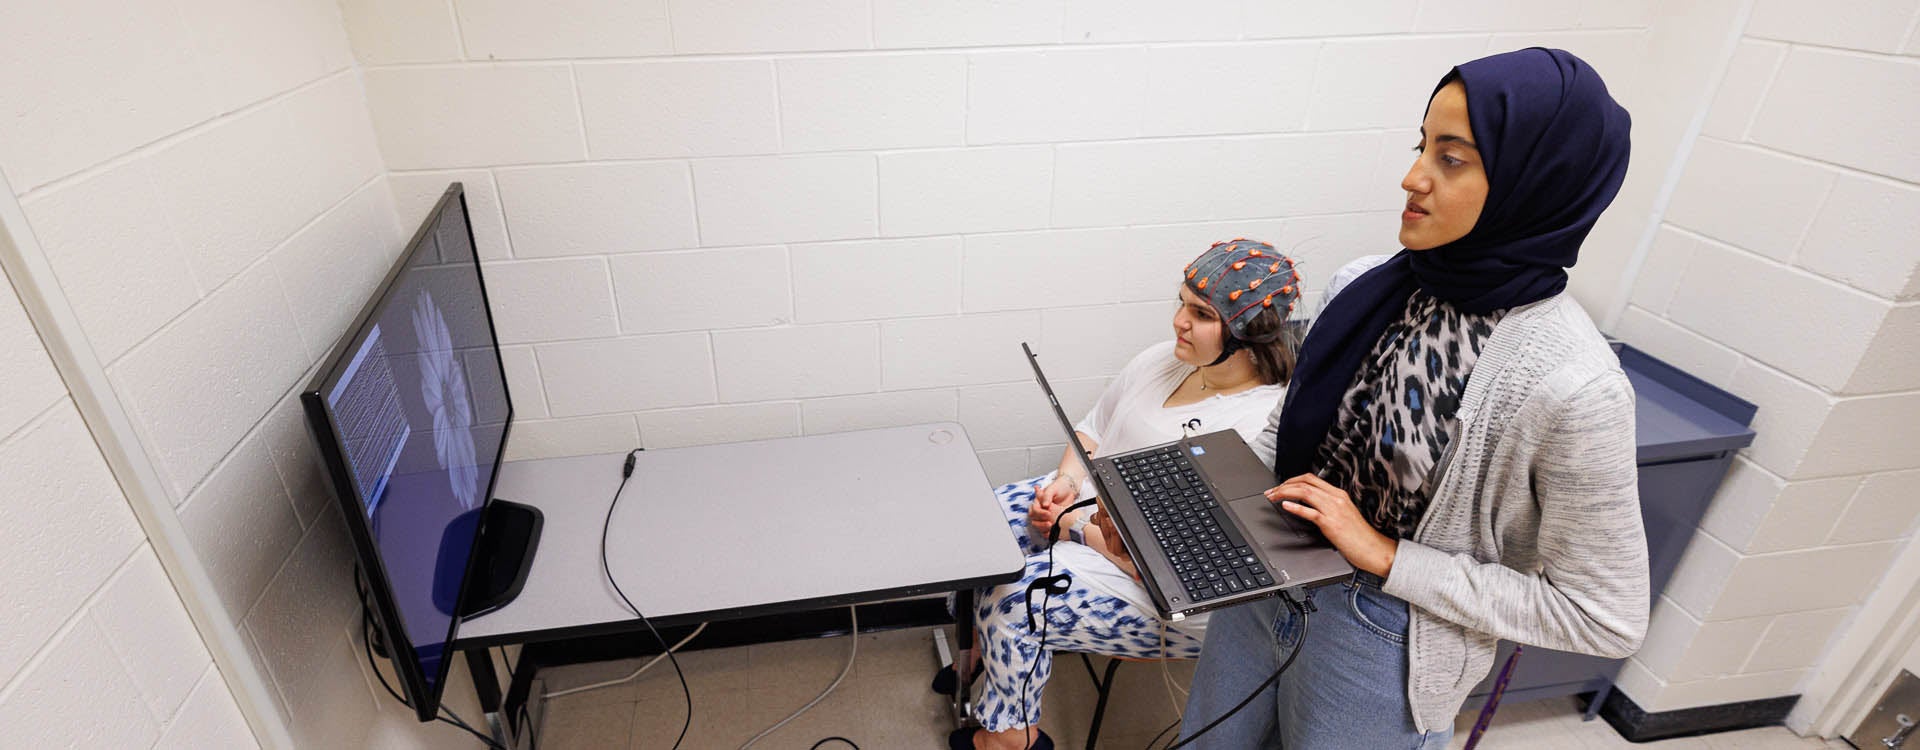 Marwa Antar, a second-year graduate student in biomedical engineering, works with a student wearing a cap that measures electrical activity in the brain. (Photo by Cliff Hollis)